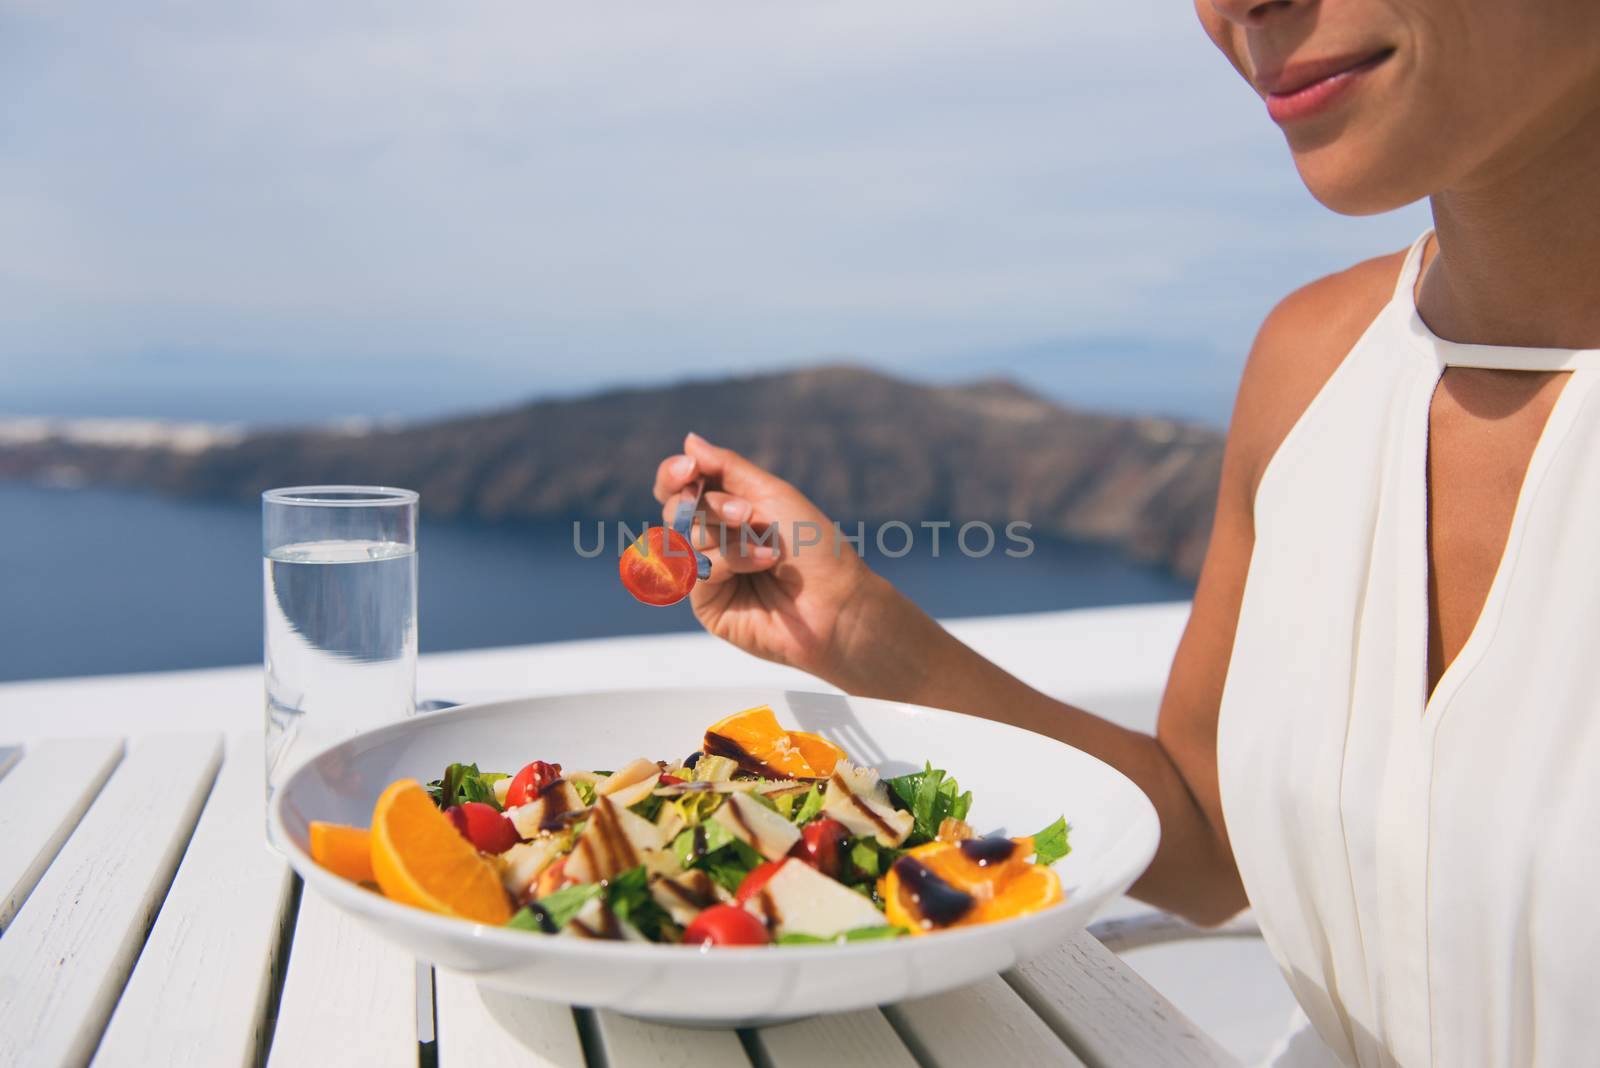 Restaurant woman eating salad luxury europe travel Santorini vacation. Healthy lifestyle people relaxing on Greece holidays by Maridav